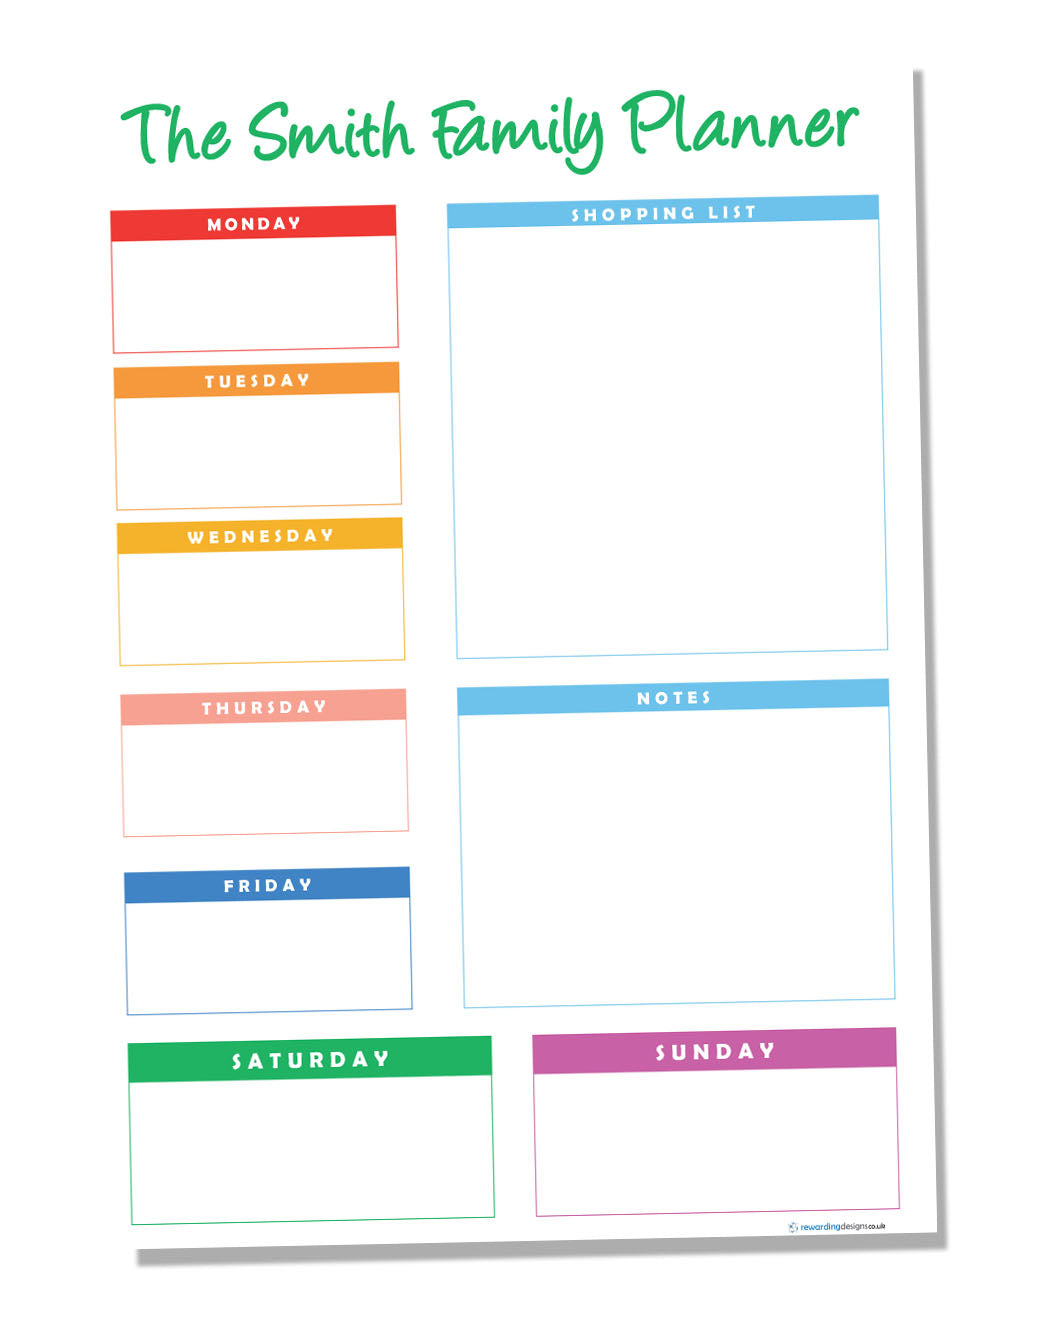 Personalised A3 Metal Meal Planner - A3 Size - Magnetic - Family Organiser